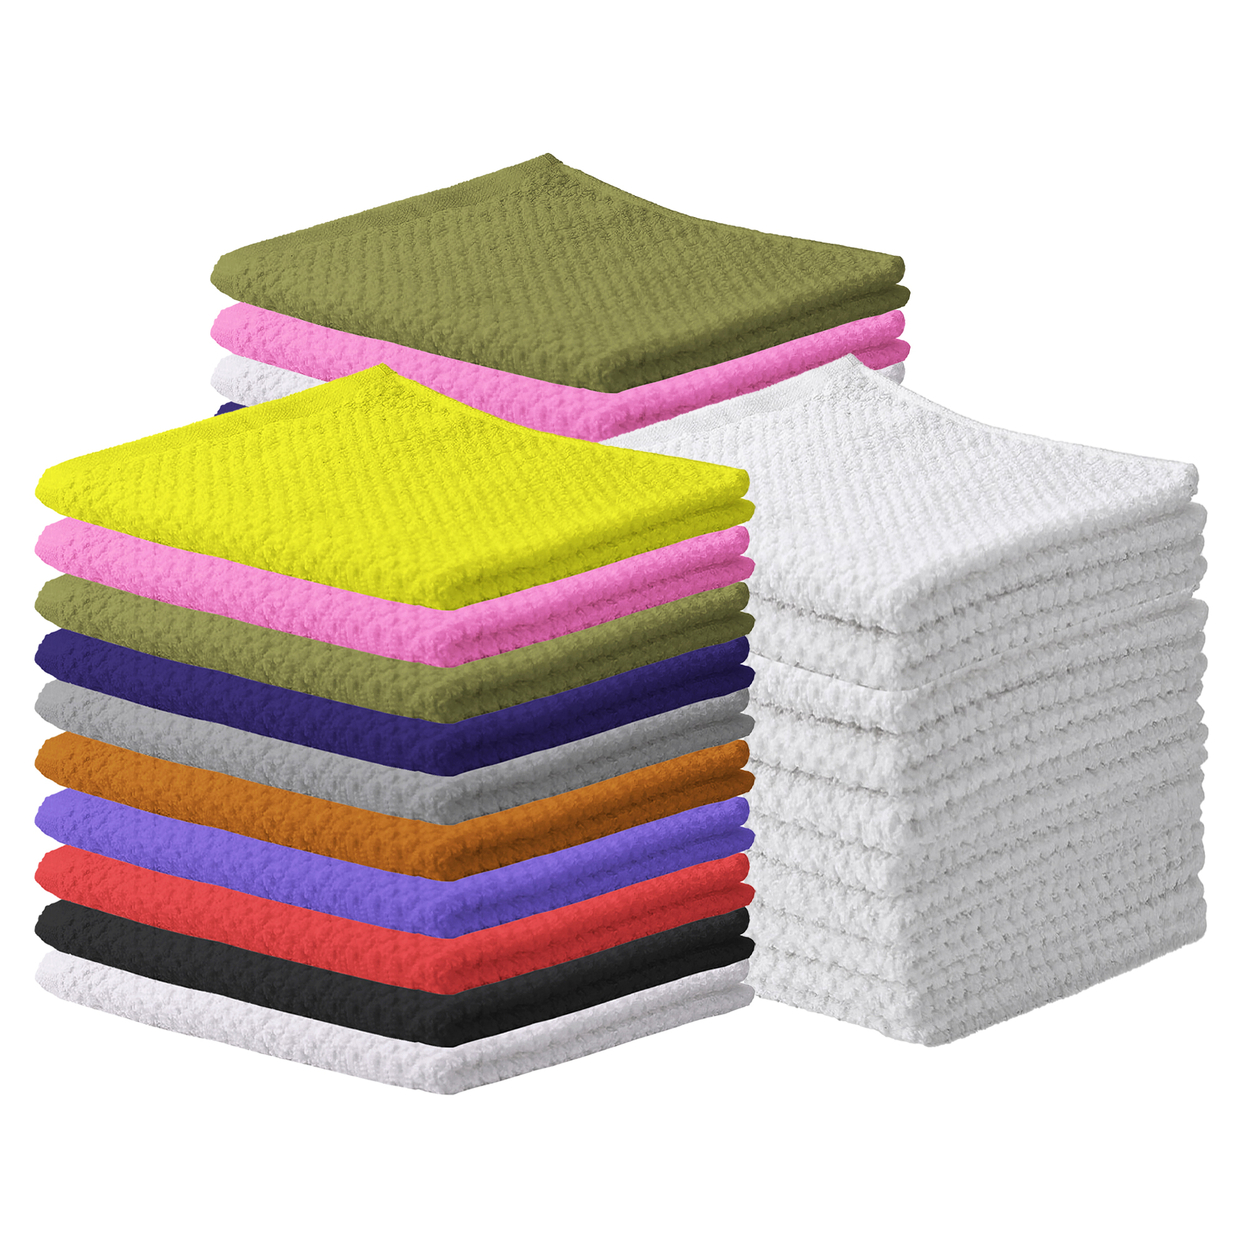 30-Pack: Multipurpose Super Absorbent Ultra Soft 100% Cotton Ring Spun Stitched Wash Cloths